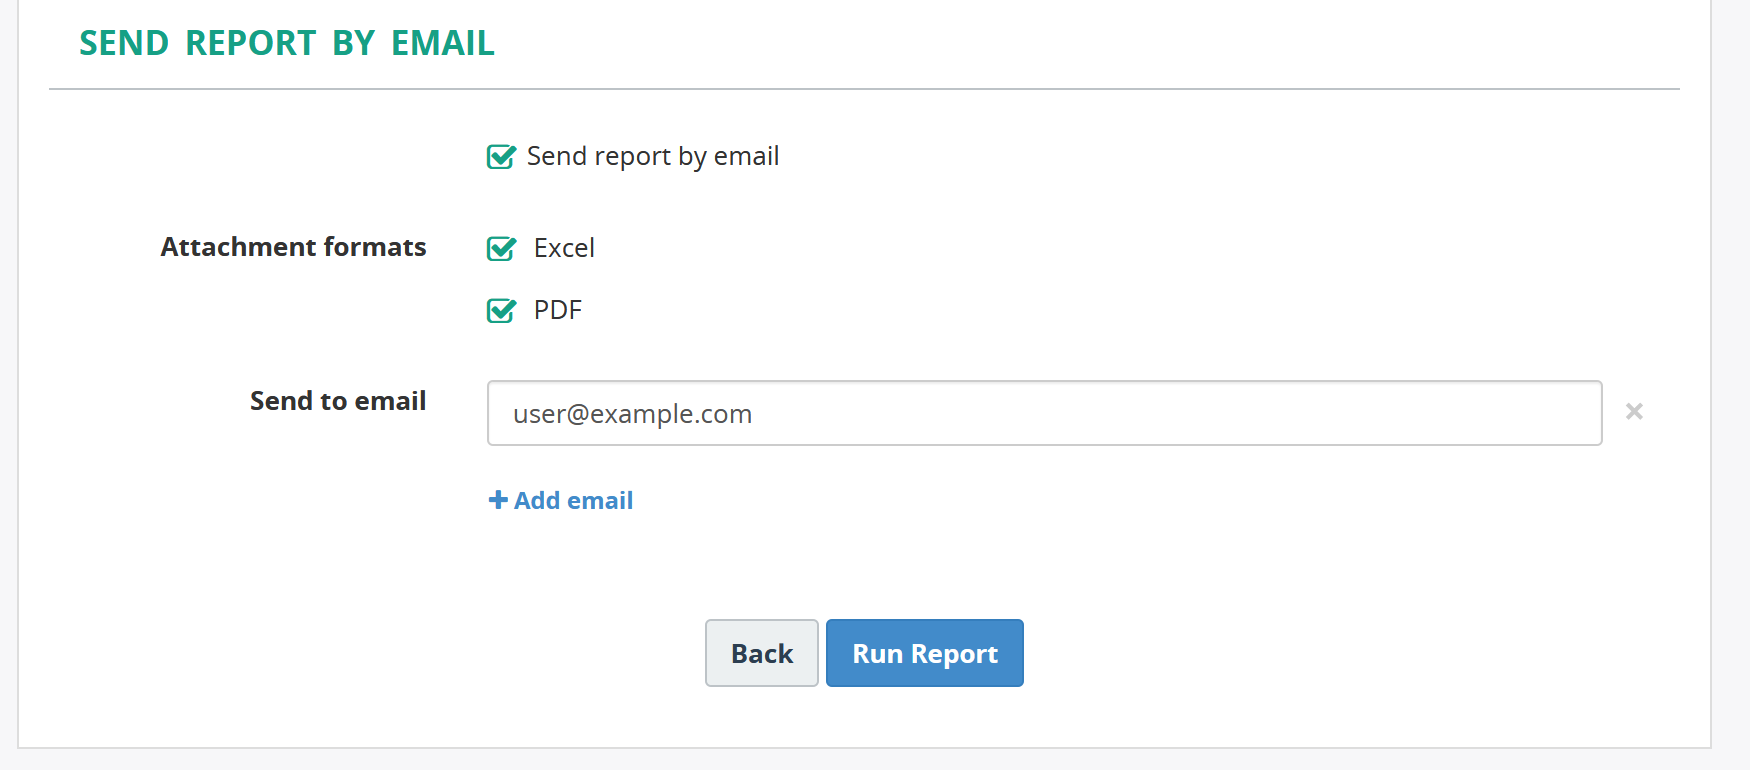 Ability to send a report by email